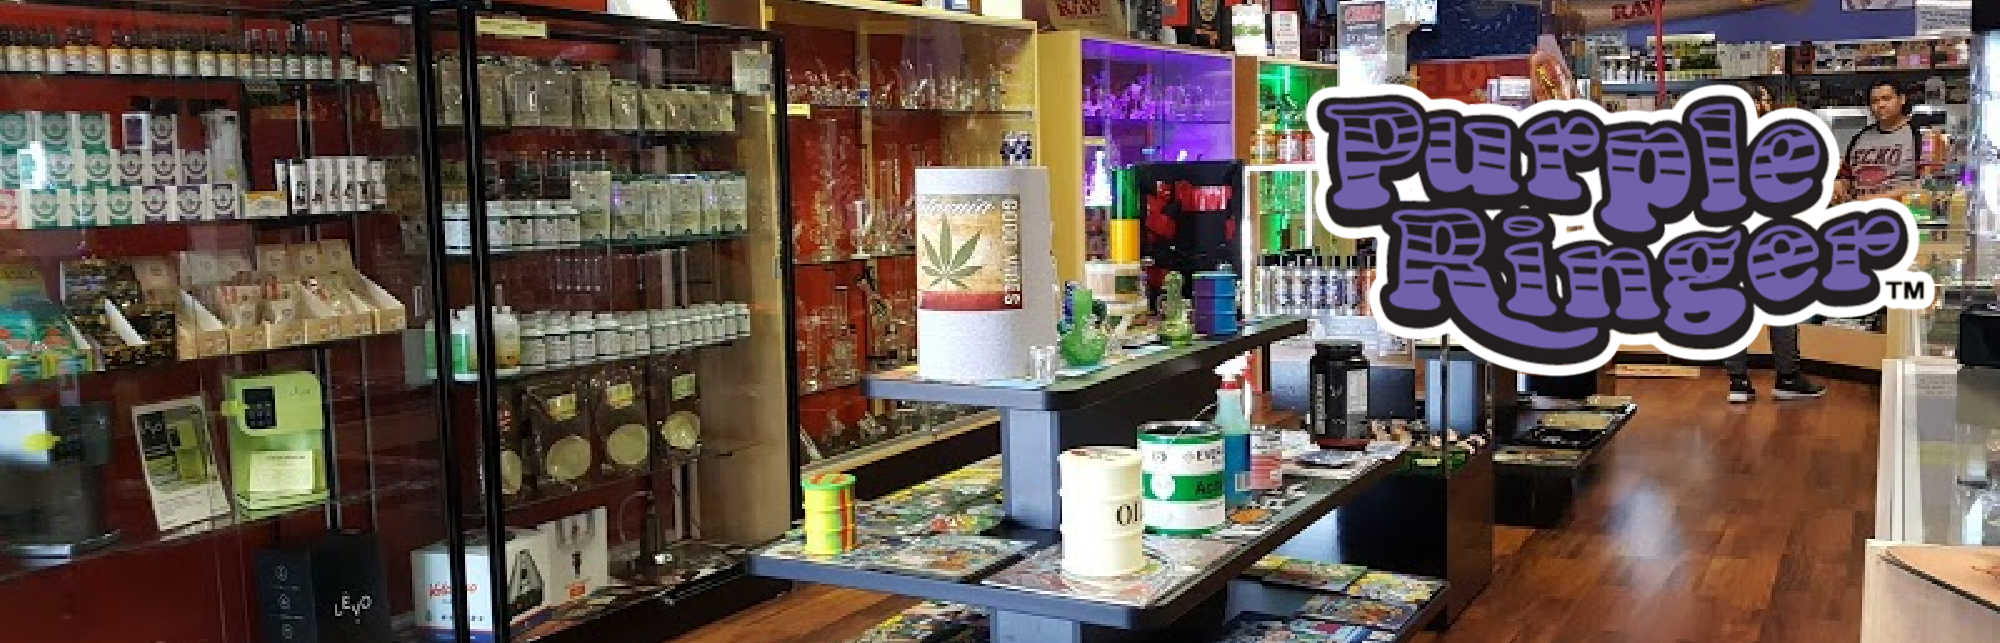 image of purple ringer smoke shop in fort myers